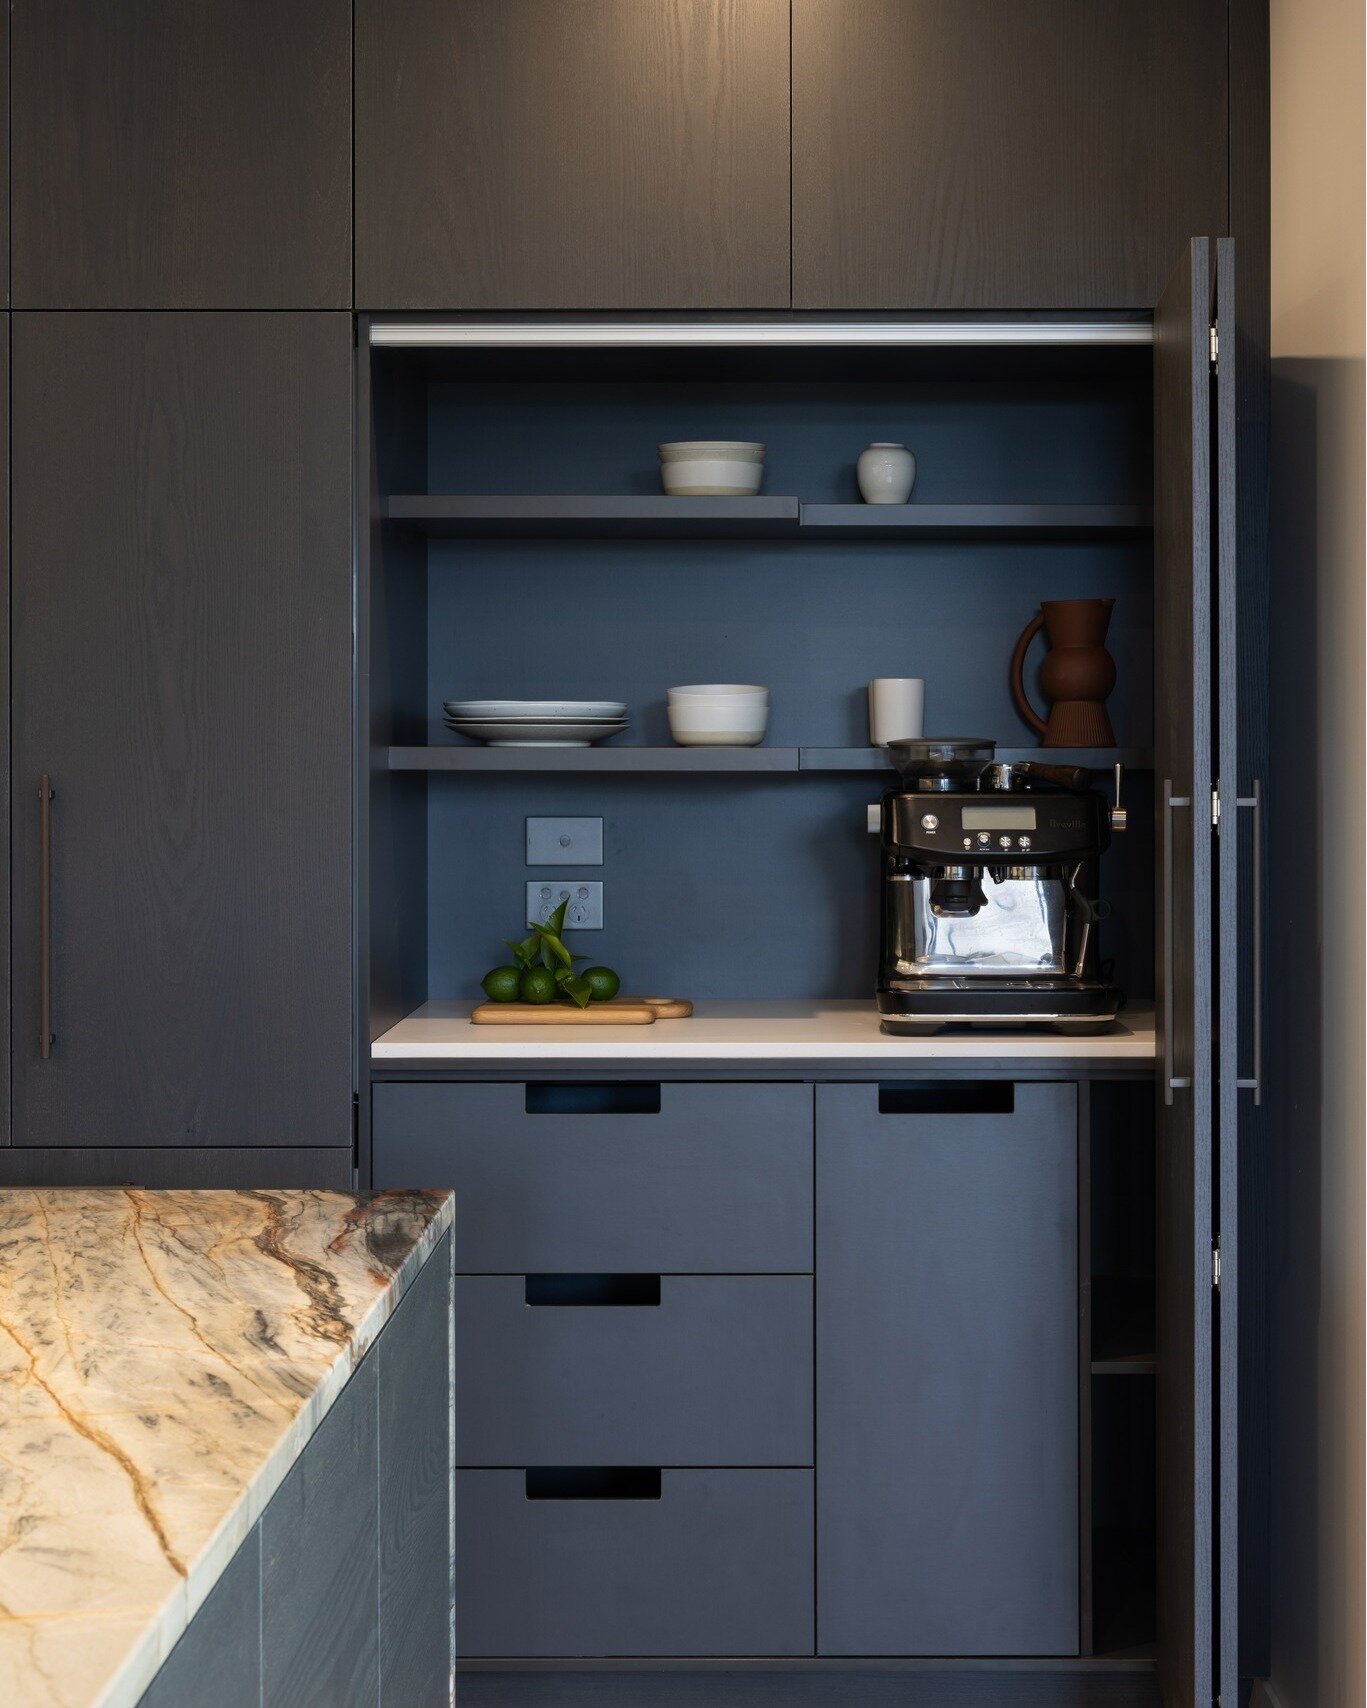 Explore our Mission Bay, Auckland! 
From the intricacies of the cabinetry, revealing cleverly concealed elements like a tucked-away coffee machine, to the striking marble benchtop that elegantly extends alongside the kitchen island, this kitchen woul